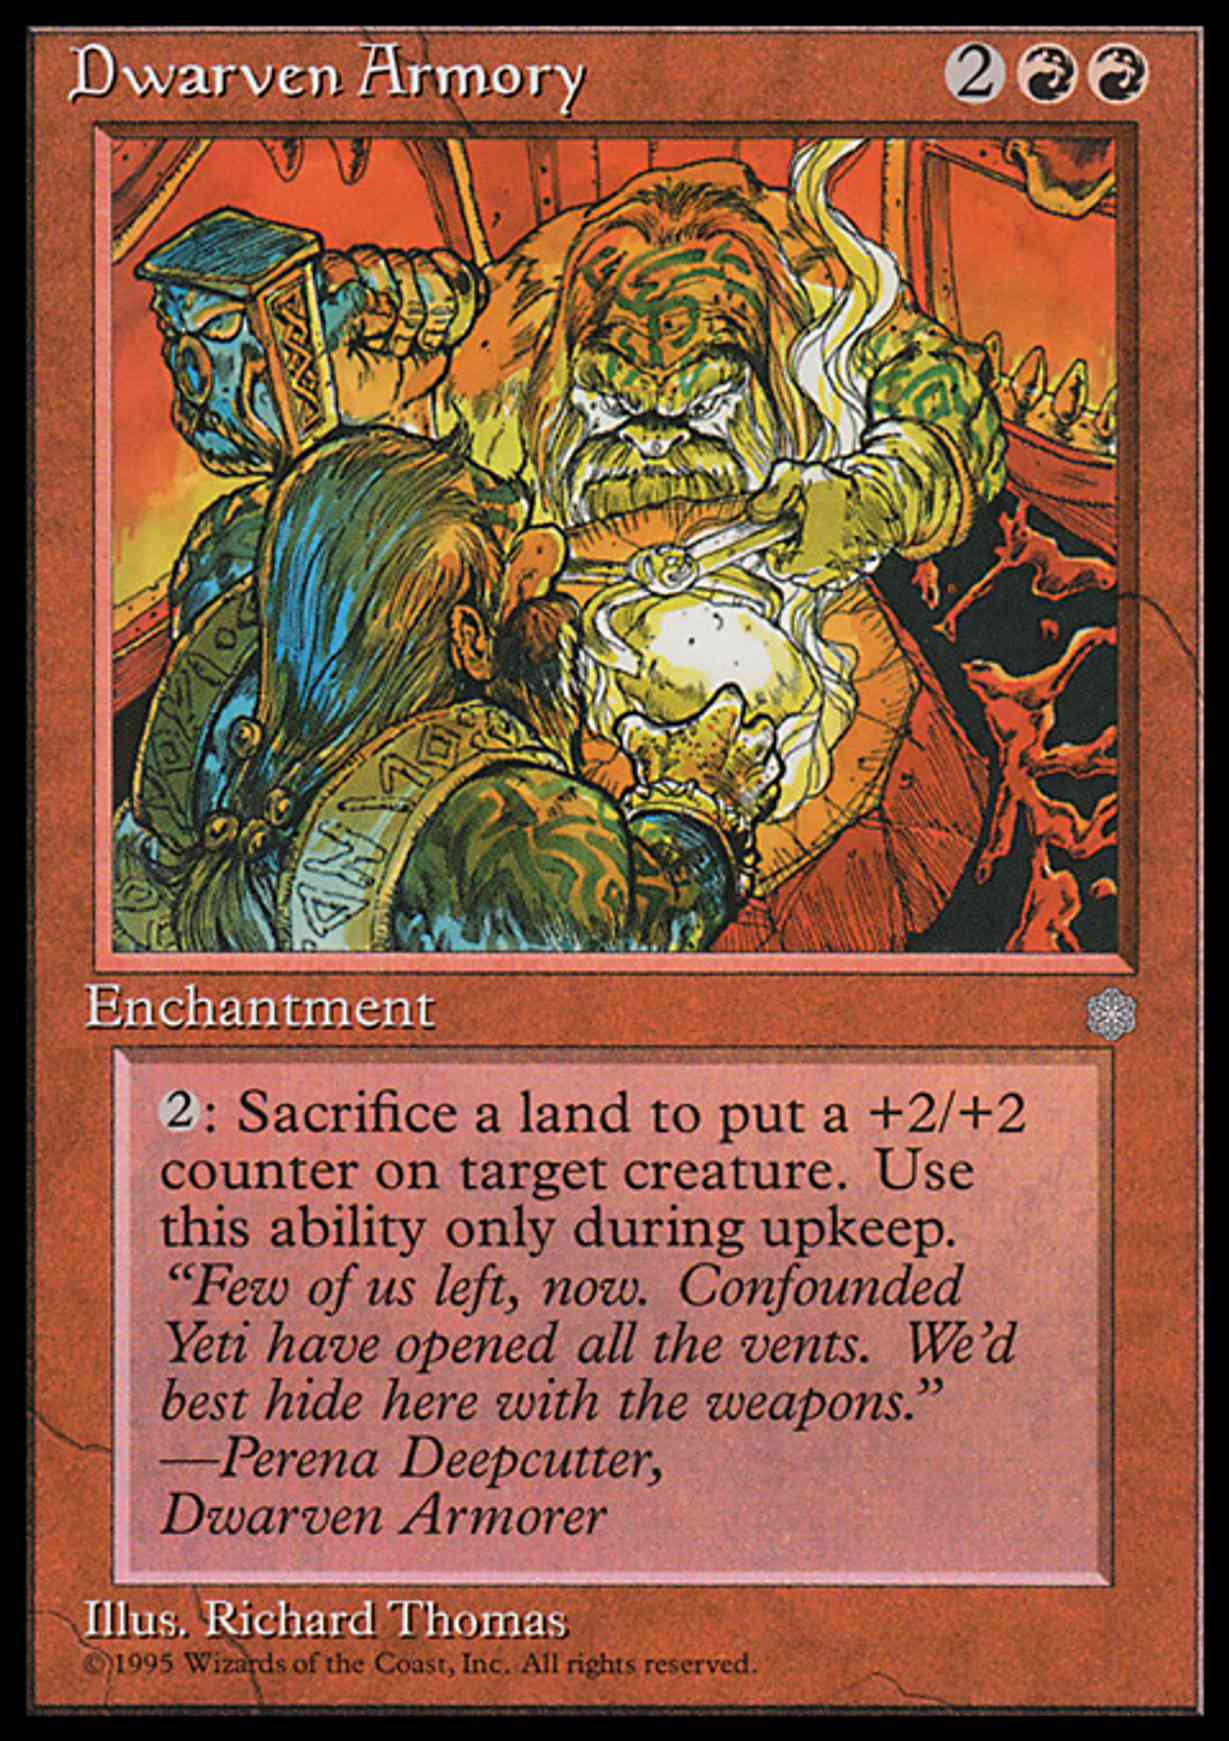 Dwarven Armory magic card front